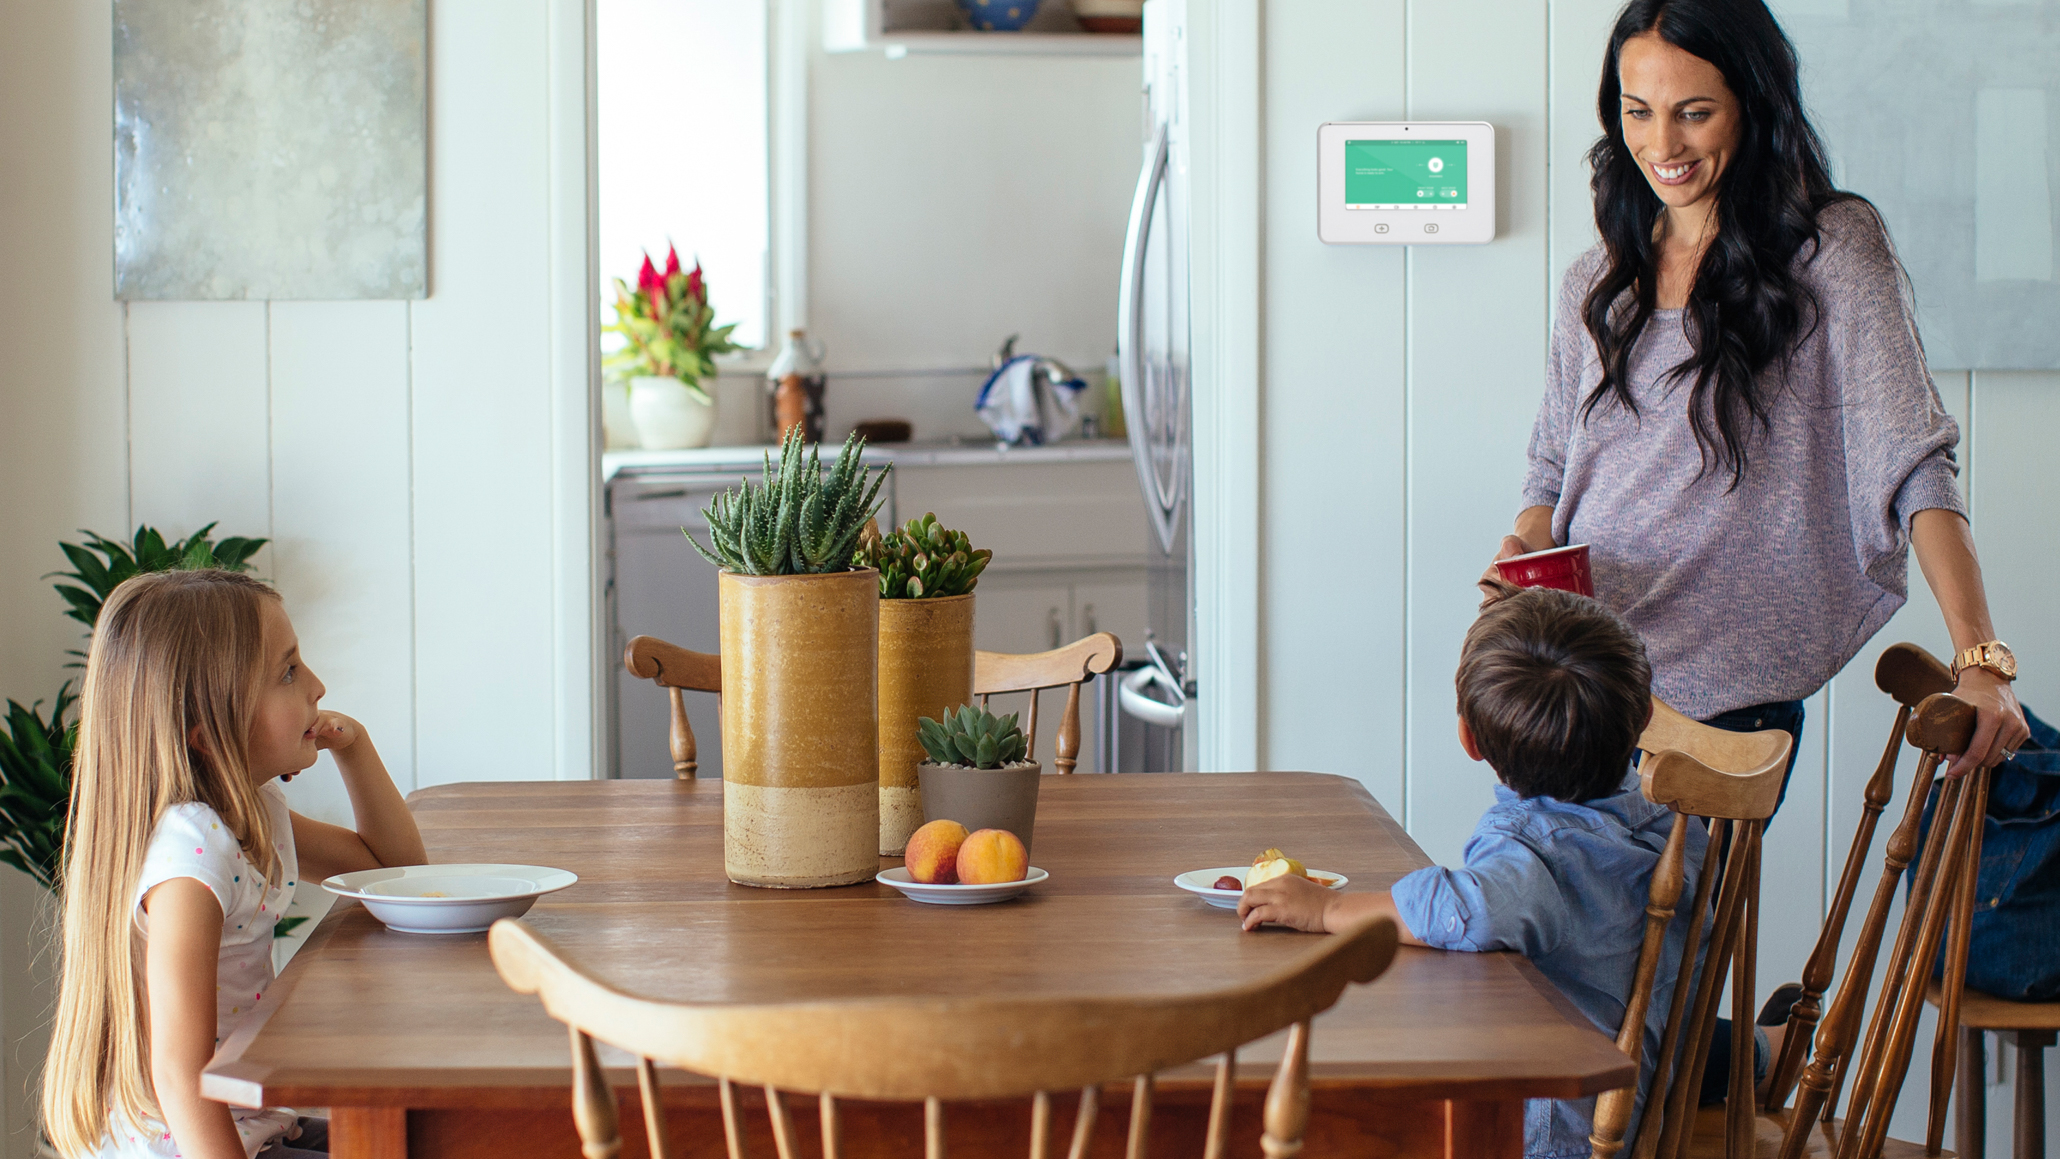 Energy-saving smart home technology has become more appealing to the female consumer, further driving the normalization of efficient living. Image: Vivint.